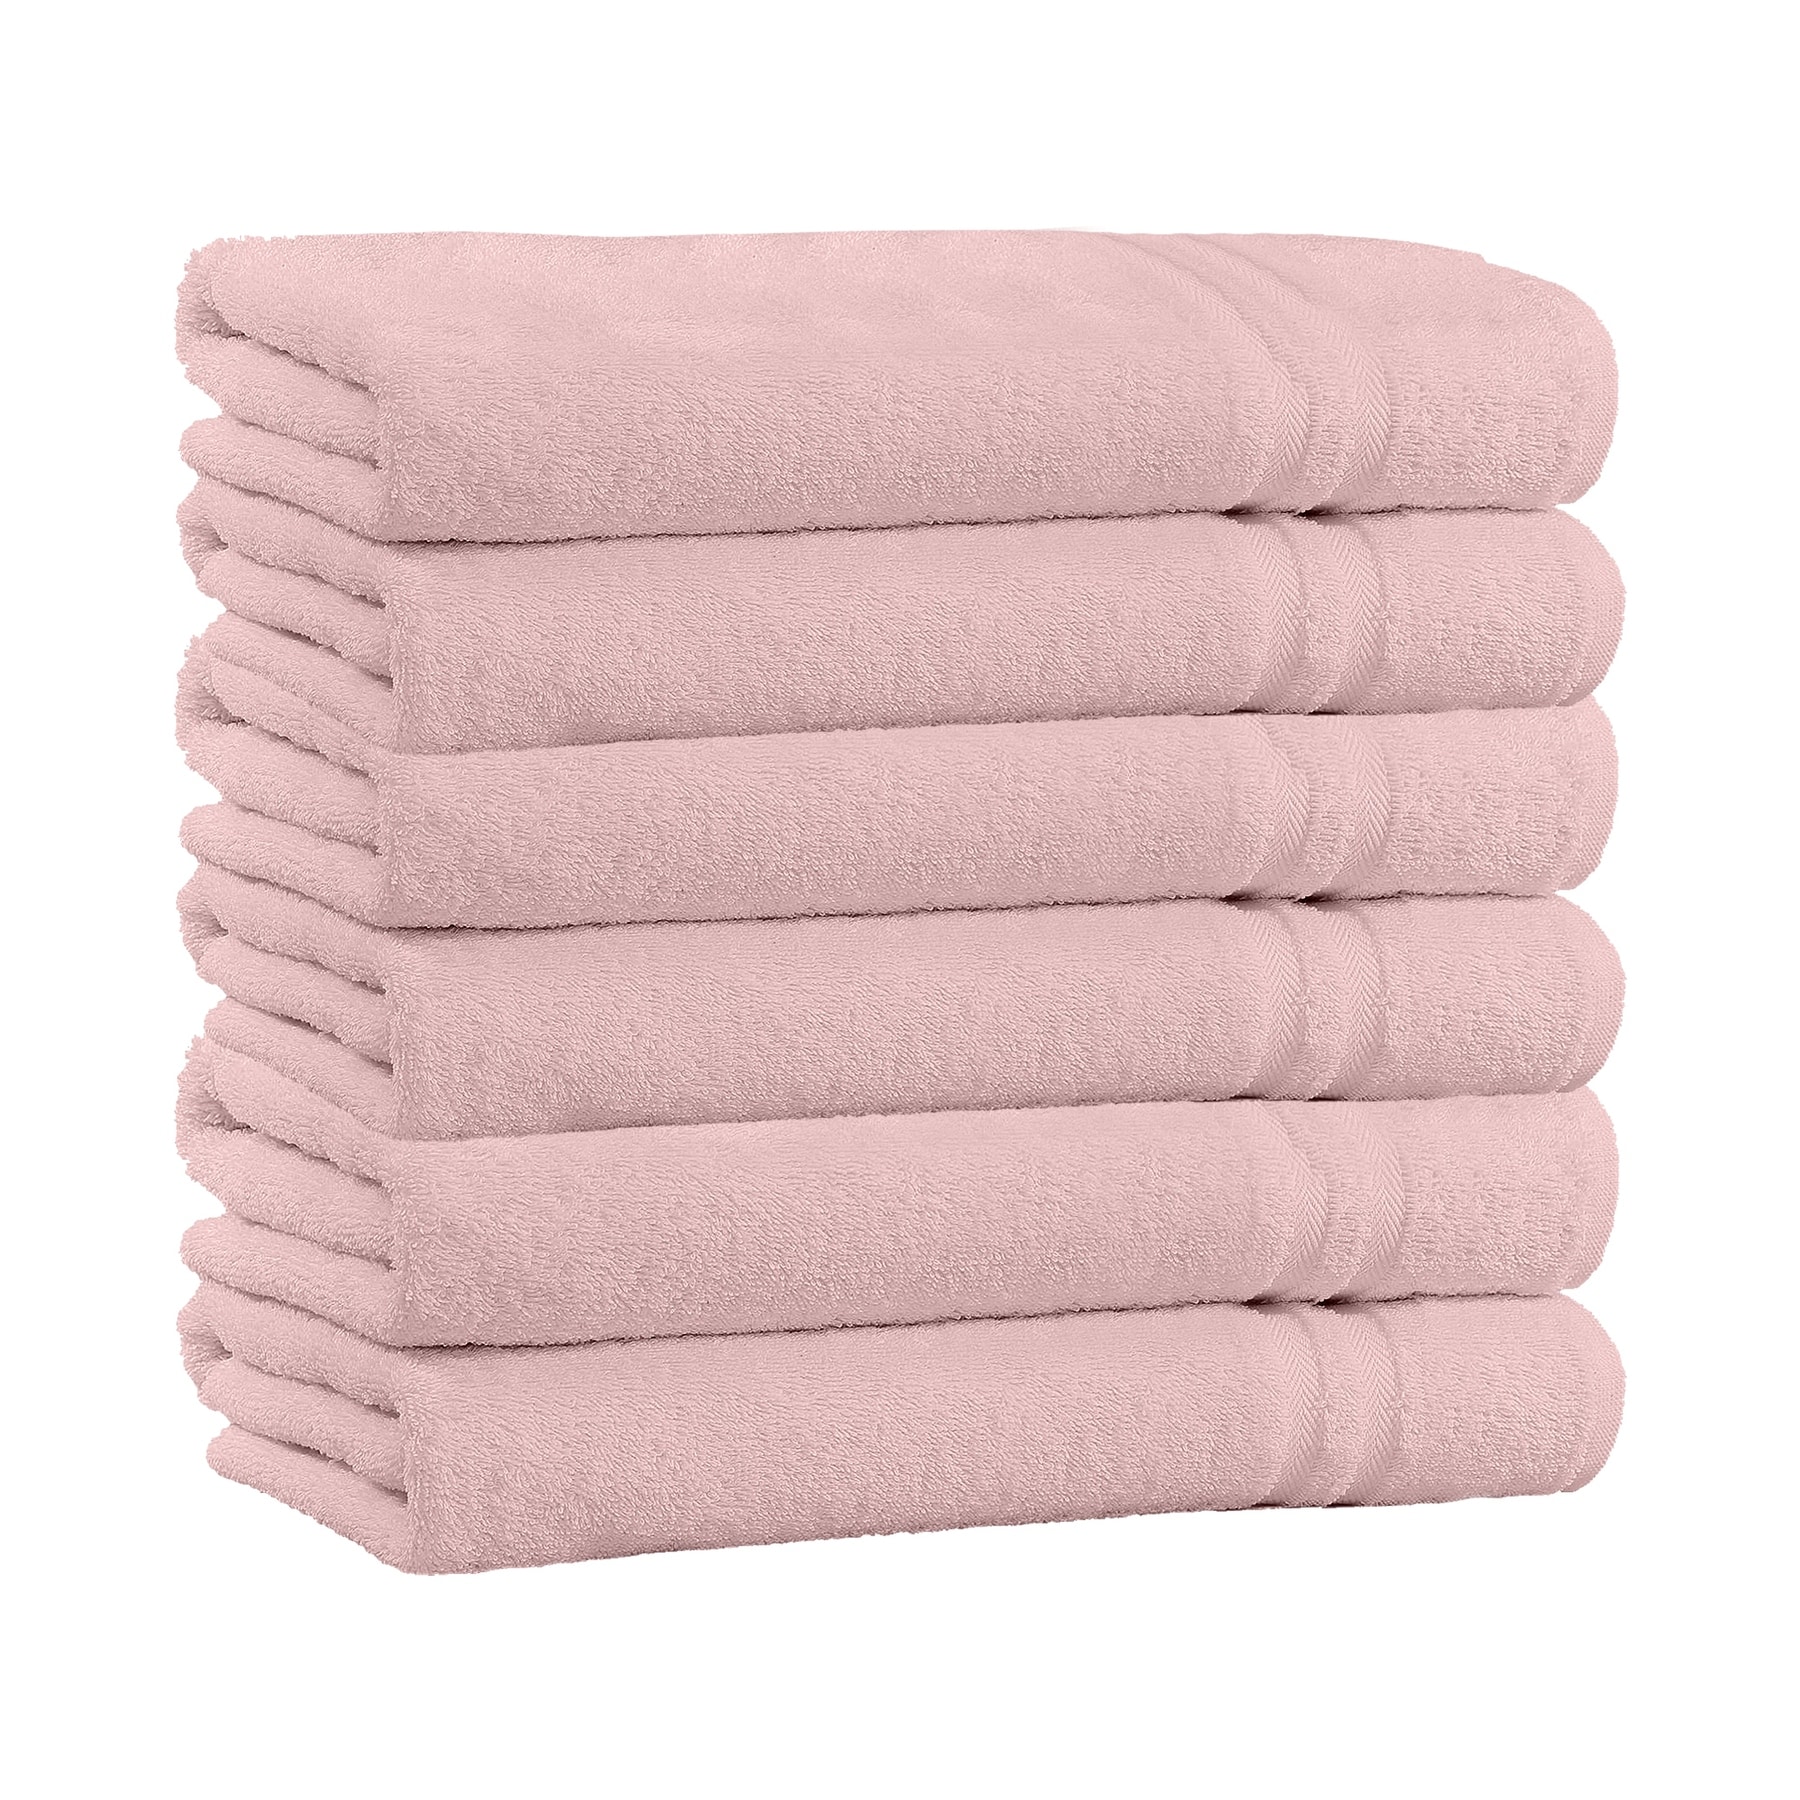 https://ak1.ostkcdn.com/images/products/is/images/direct/af7cf5fea9e6c4a887c8dc66f21f281559e3c8c5/5-Pack-100%25-Cotton-Extra-Plush-%26-Absorbent-Bath-Towels.jpg